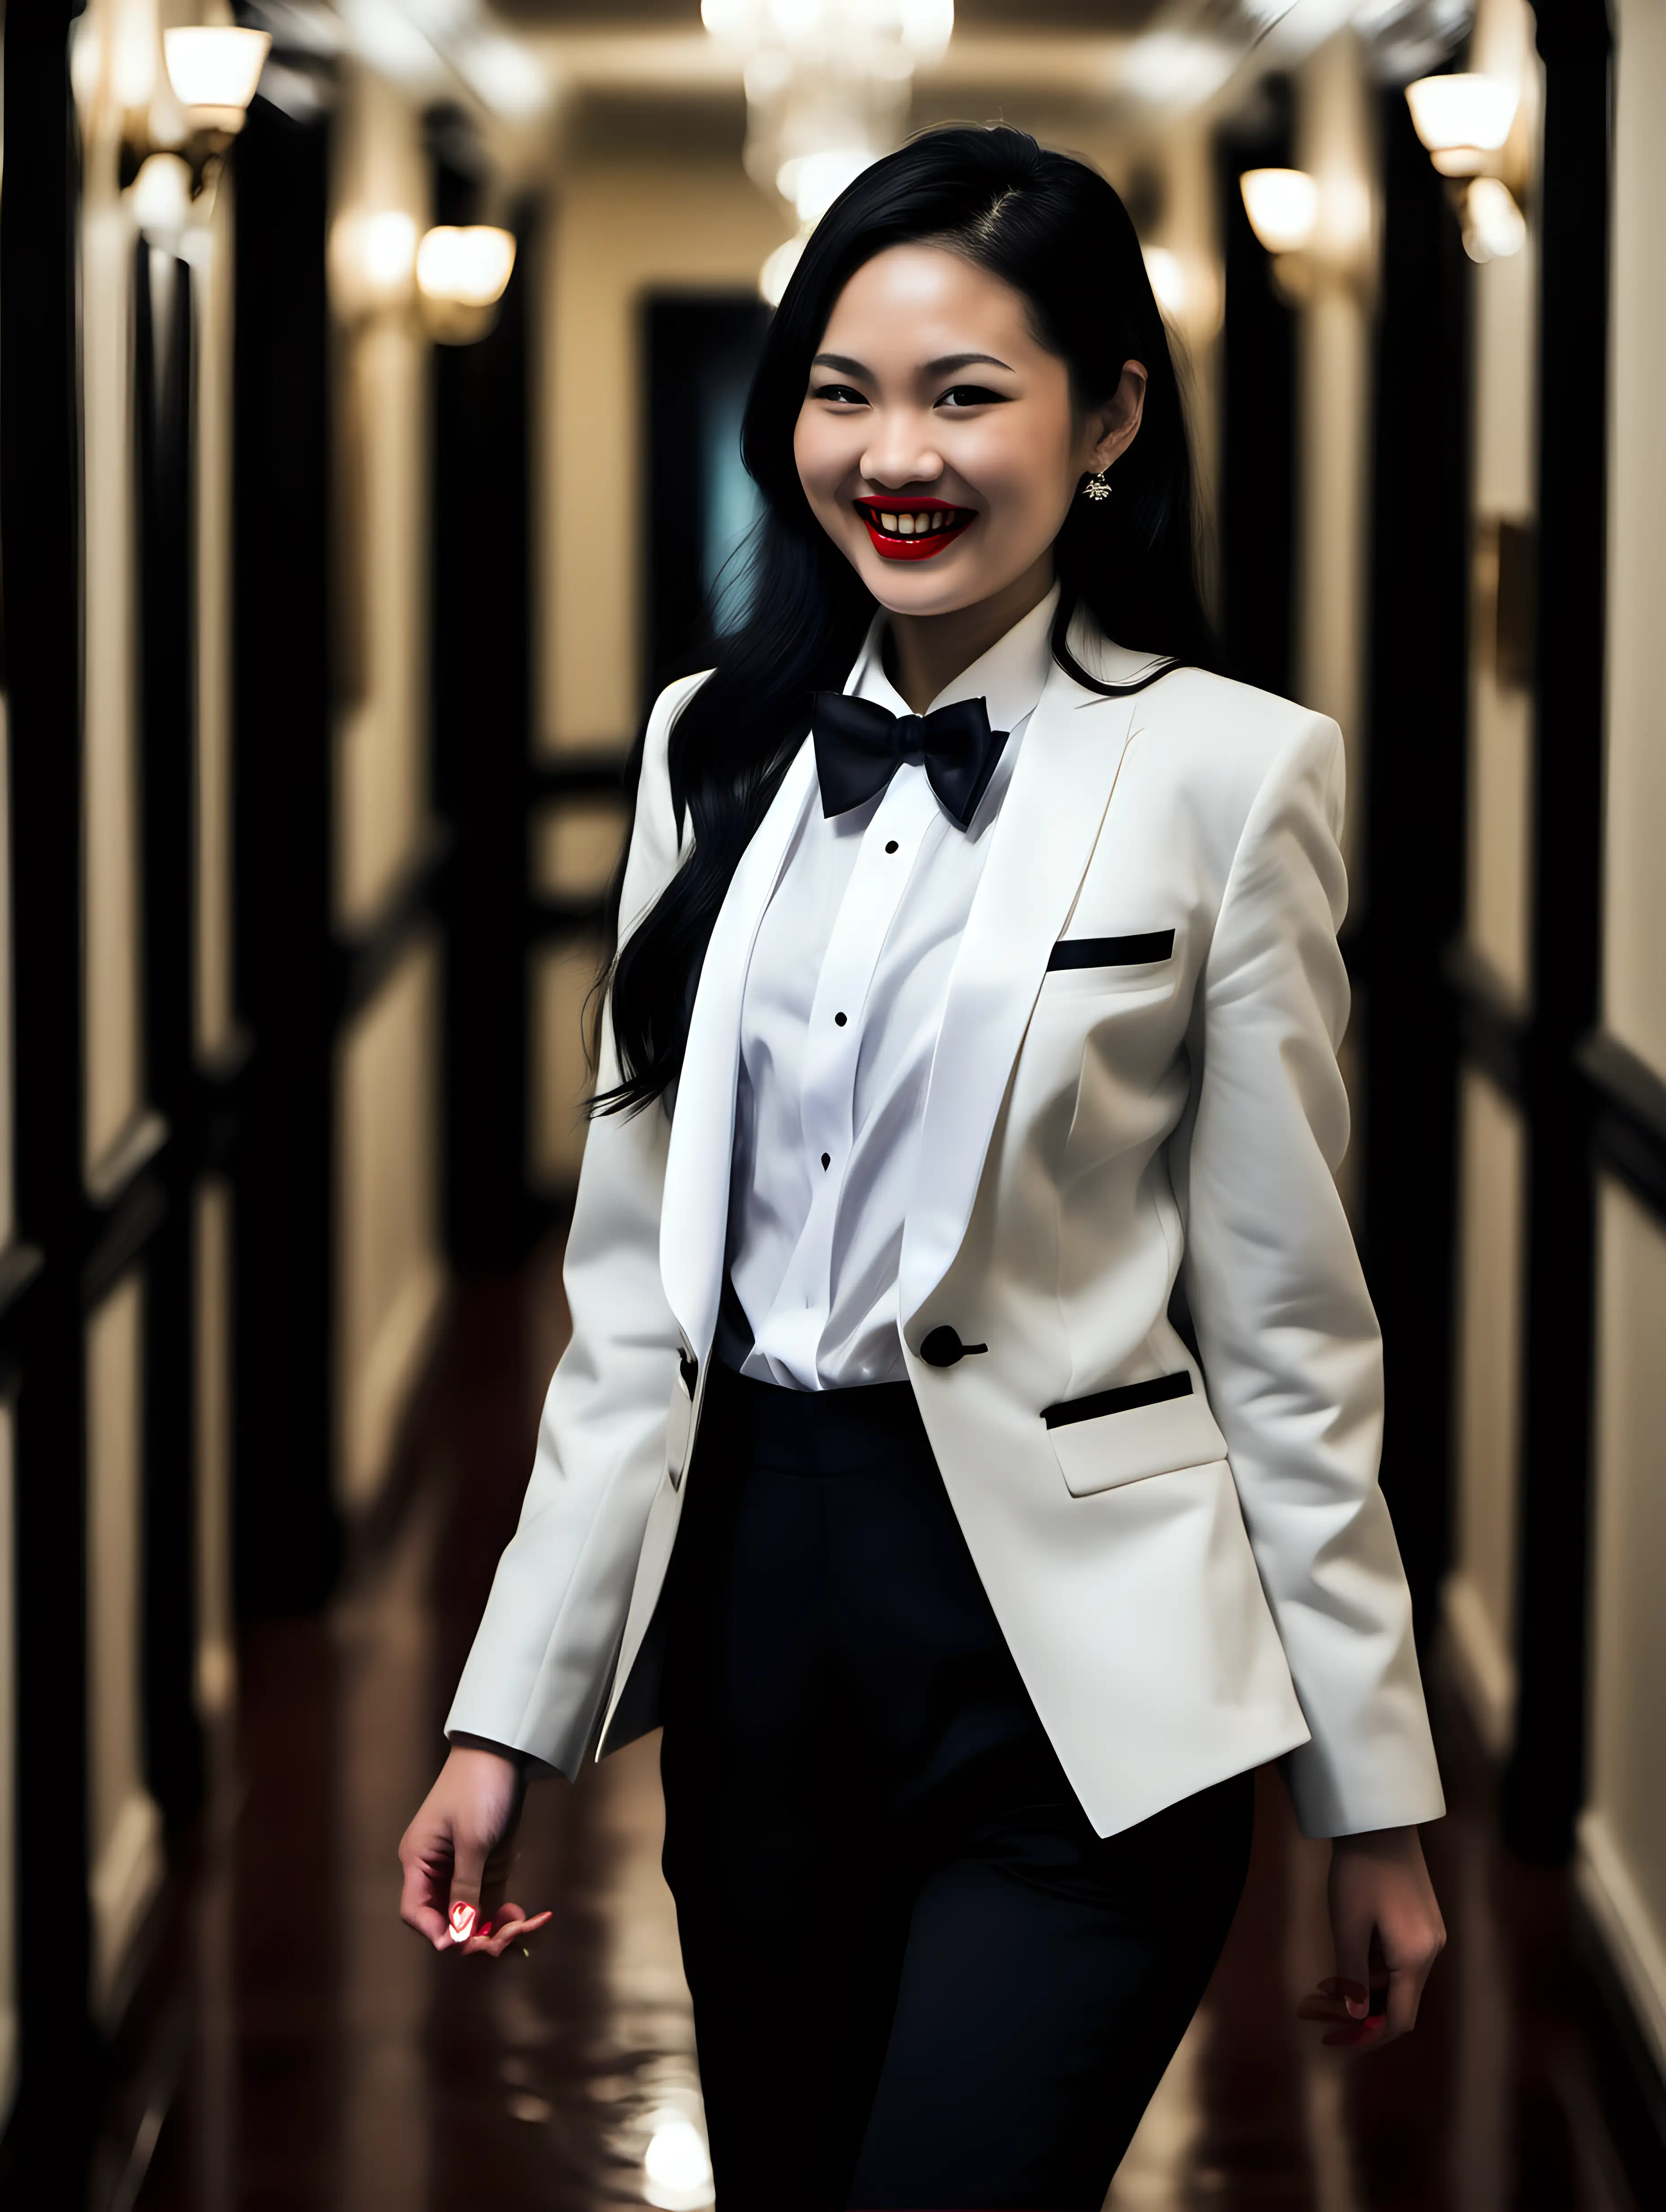 It is night. A smiling and laughing 30 year old Vietnamese woman with long black hair and red lipstick is walking down a dark hallway in a mansion. She is facing forward. She is wearing a tuxedo with a black jacket with a corsage and a white shirt and a black bowtie and black cufflinks and black pants. She is relaxed. Her jacket is open.